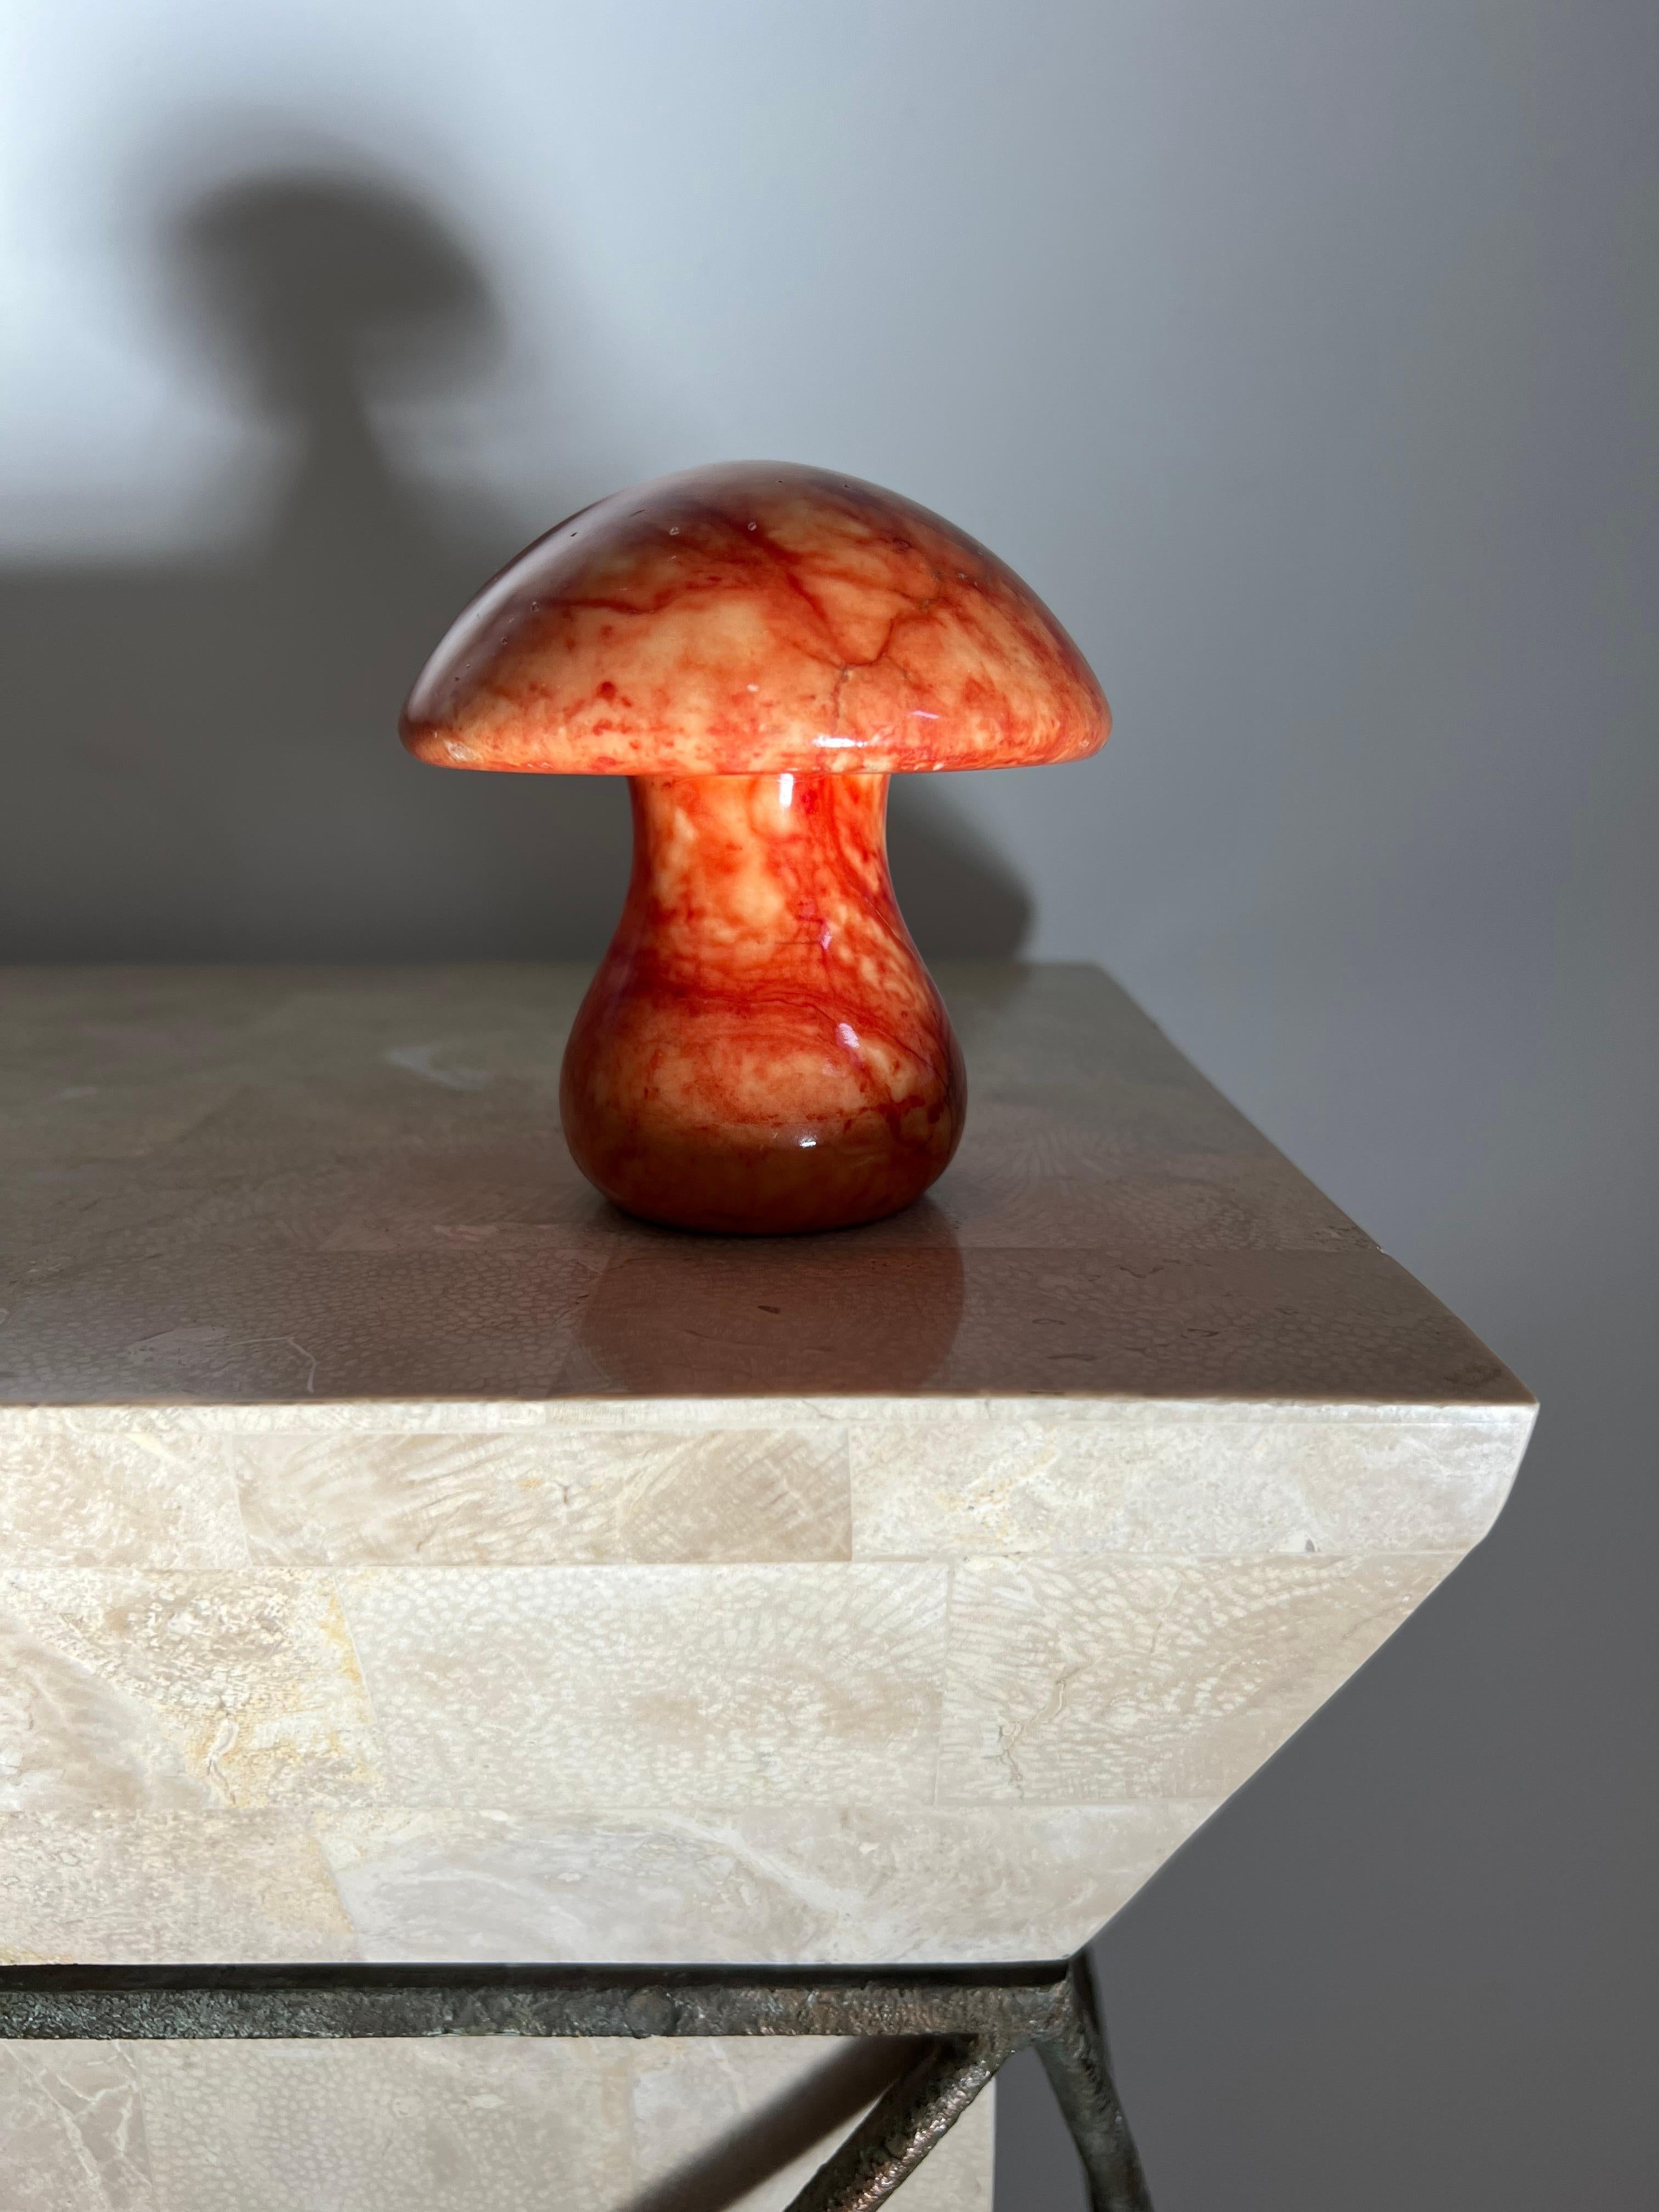 A uniquely large vintage Italian marble mushroom paperweight or objet d’art, 1960s. Tones of peach, cadmium, and tangerine. Minor scuffs here and there but overall fabulous condition. Lovely as a gift. 
Dimensions: 4” diameter X 4.25” height 